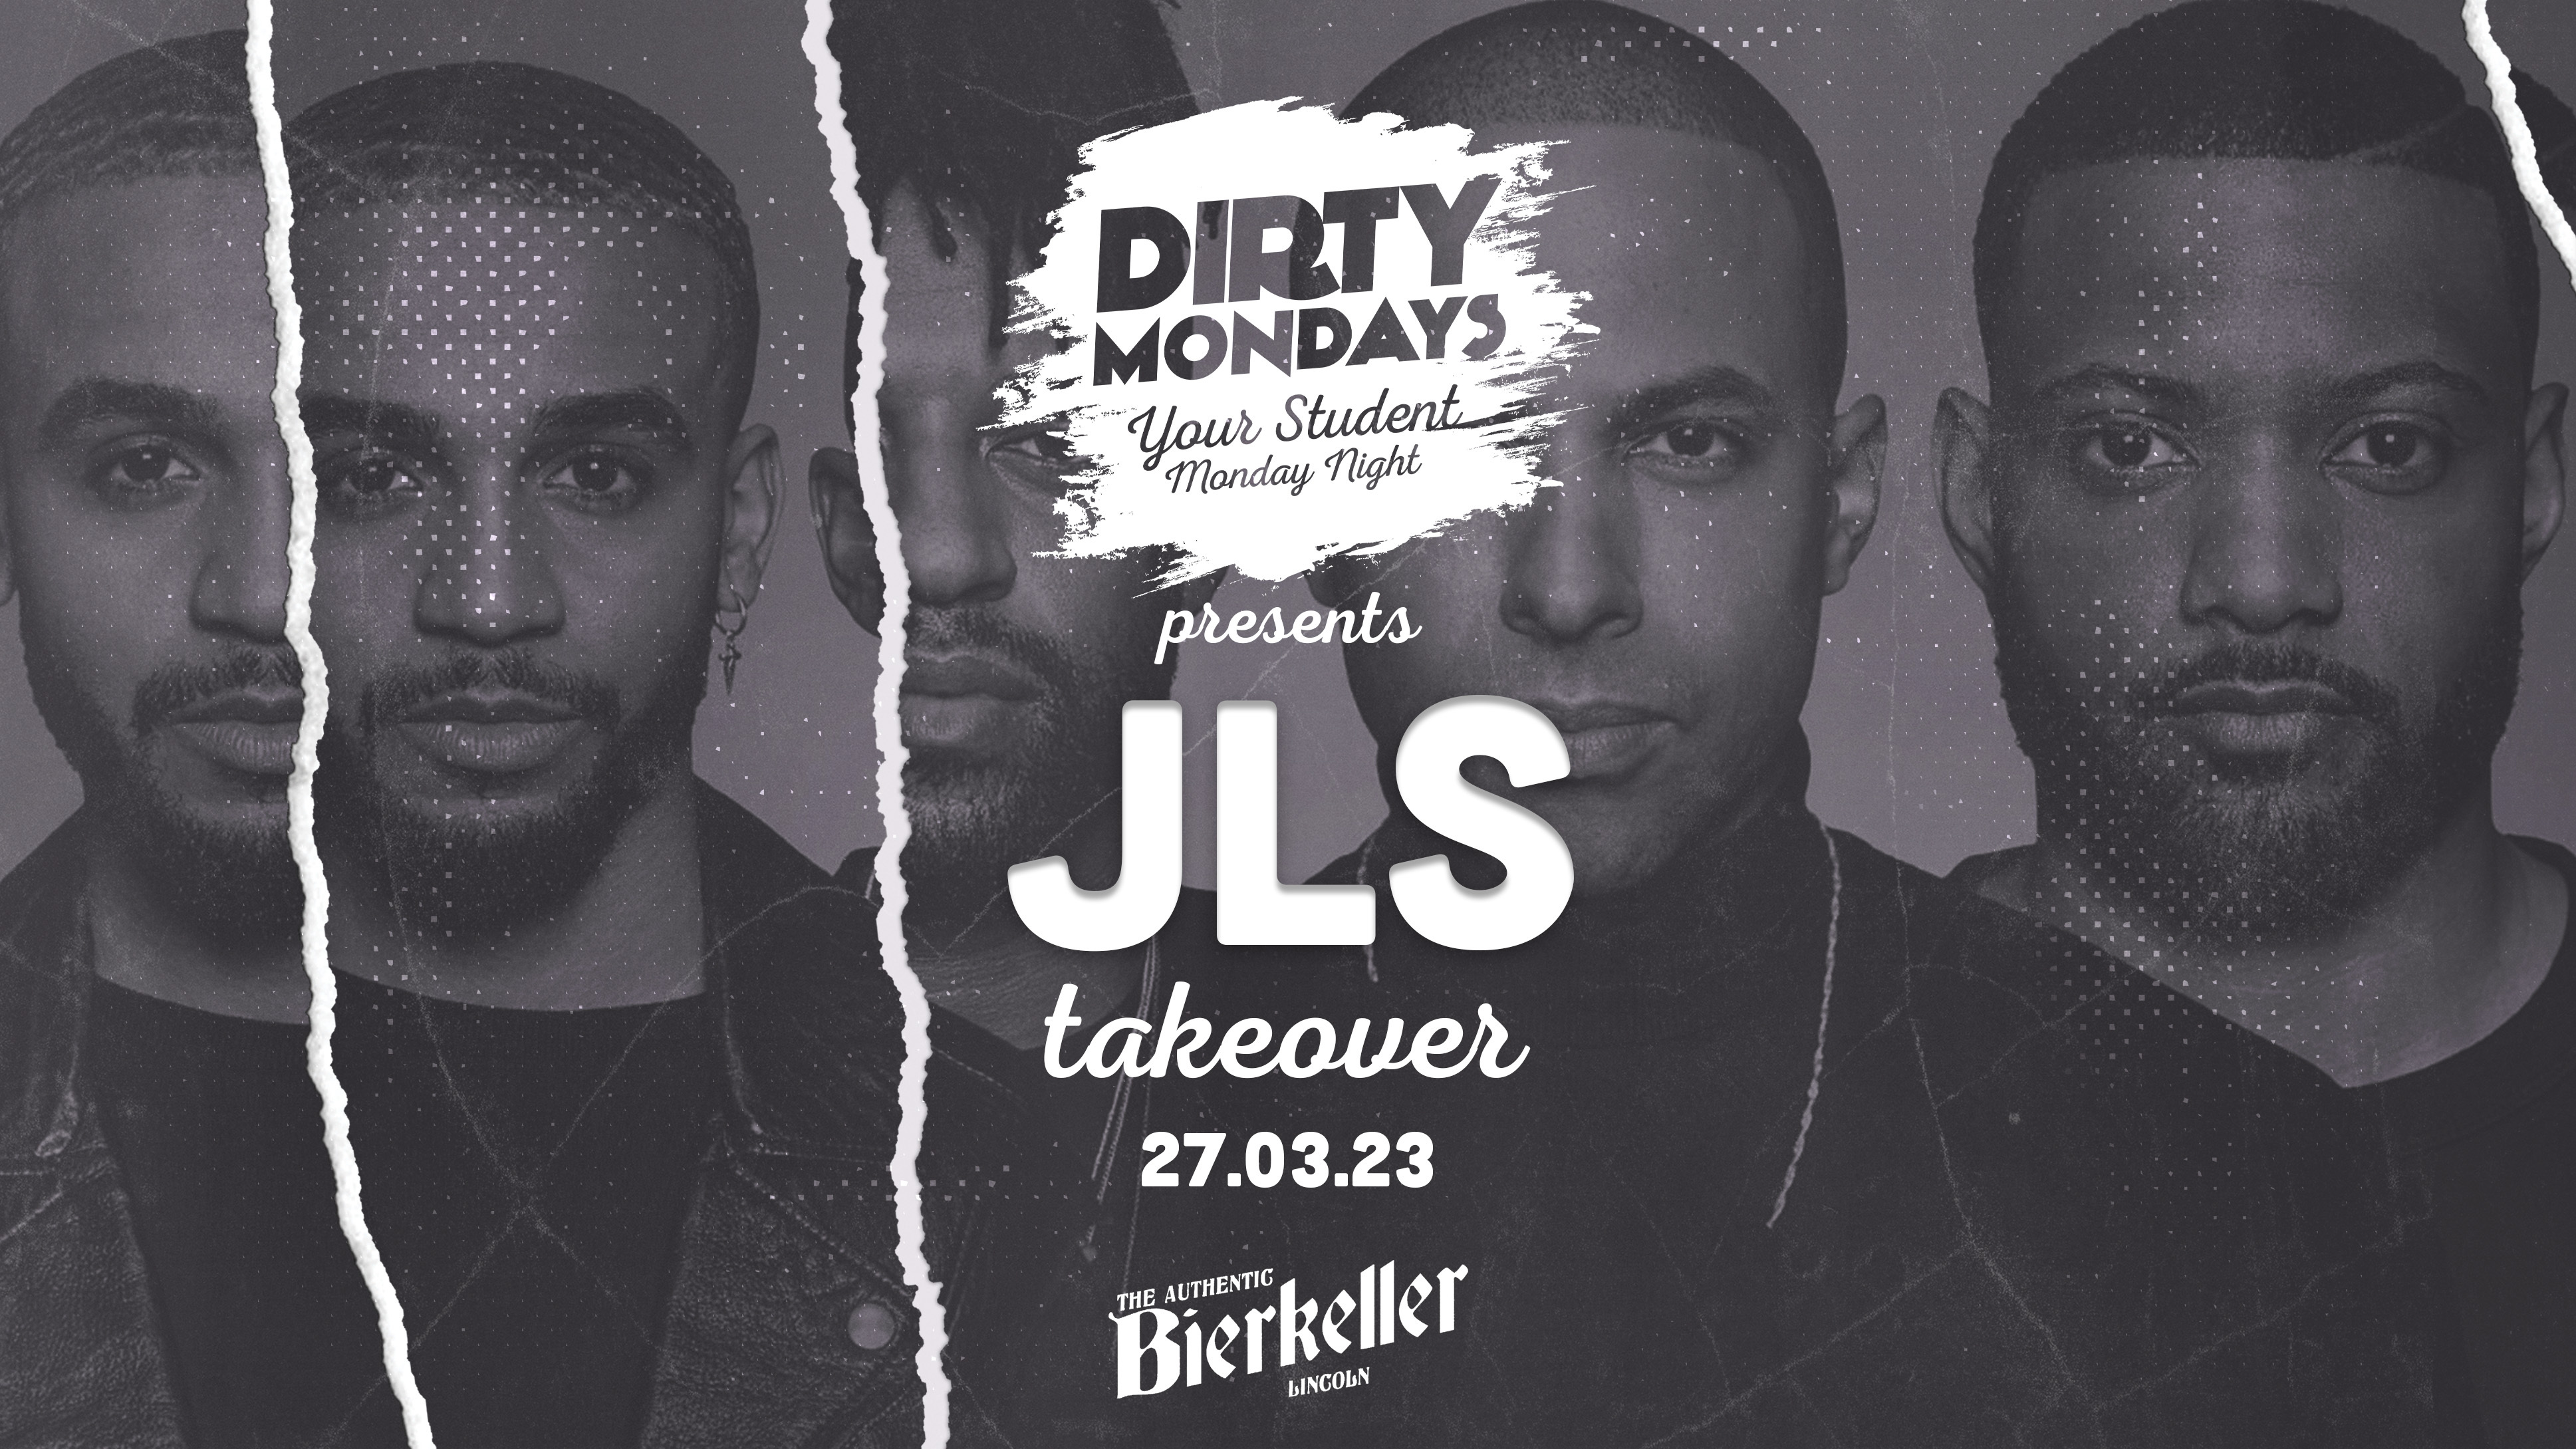 DIRTY MONDAYS | JLS TAKEOVER | £1 TICKETS